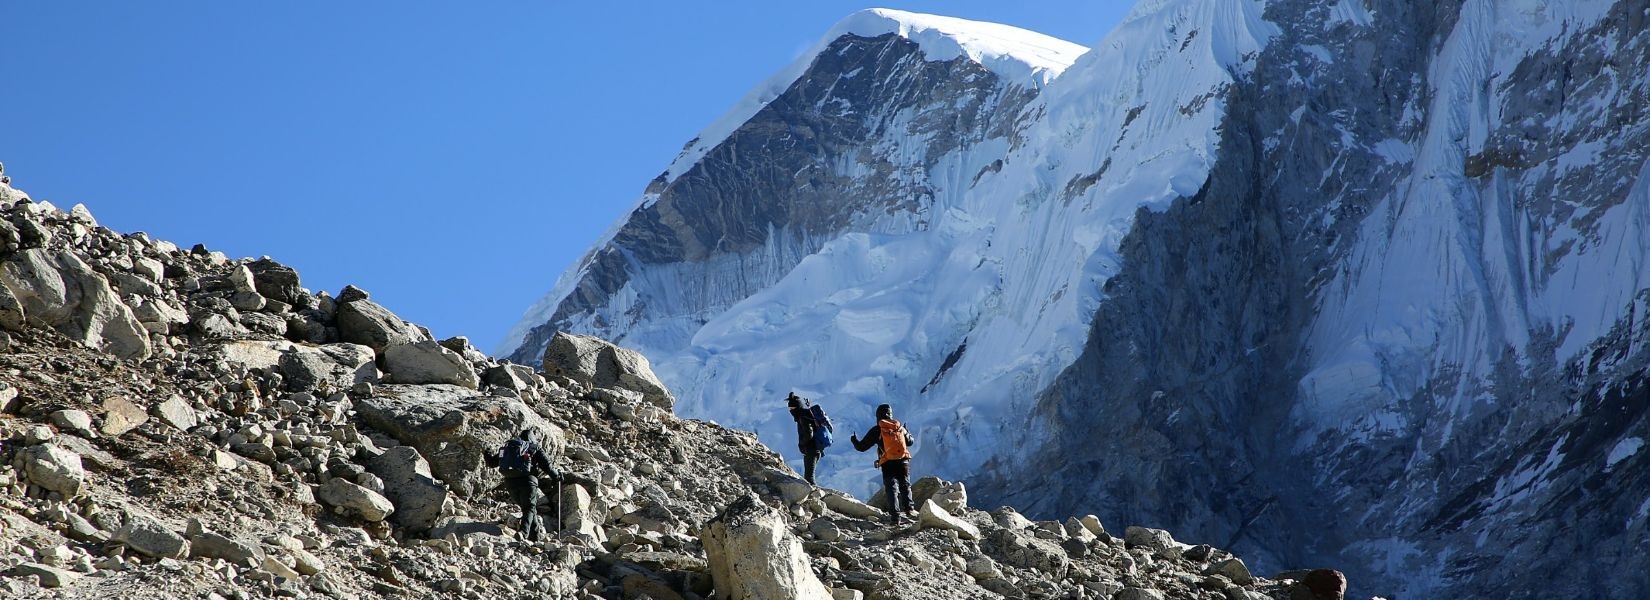 Solo Trekking Ban in Nepal: What You Need to Know